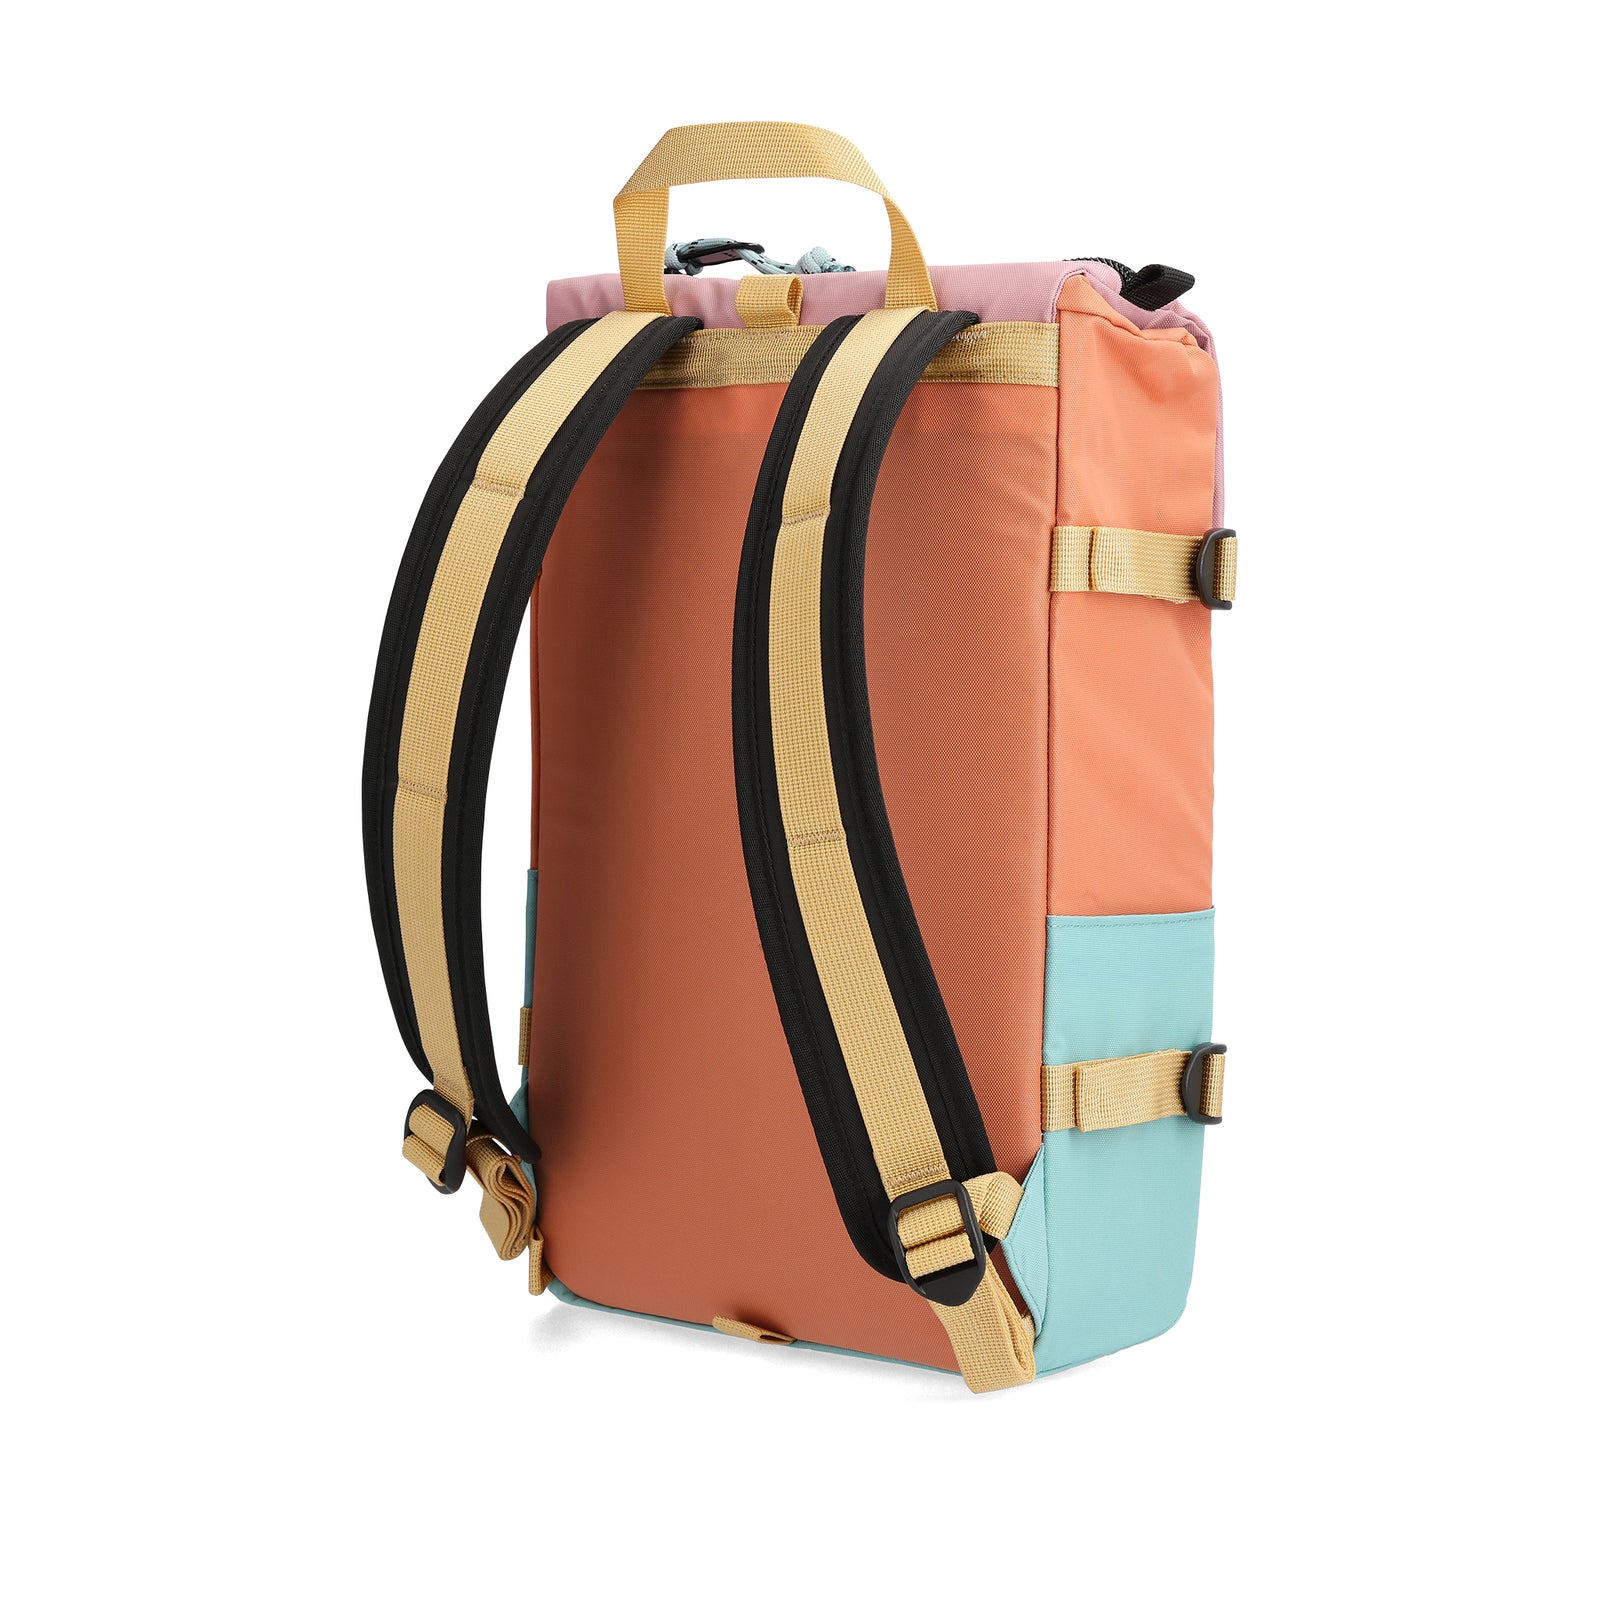 Back View of Topo Designs Rover Pack Mini in "Rose / Geode Green"